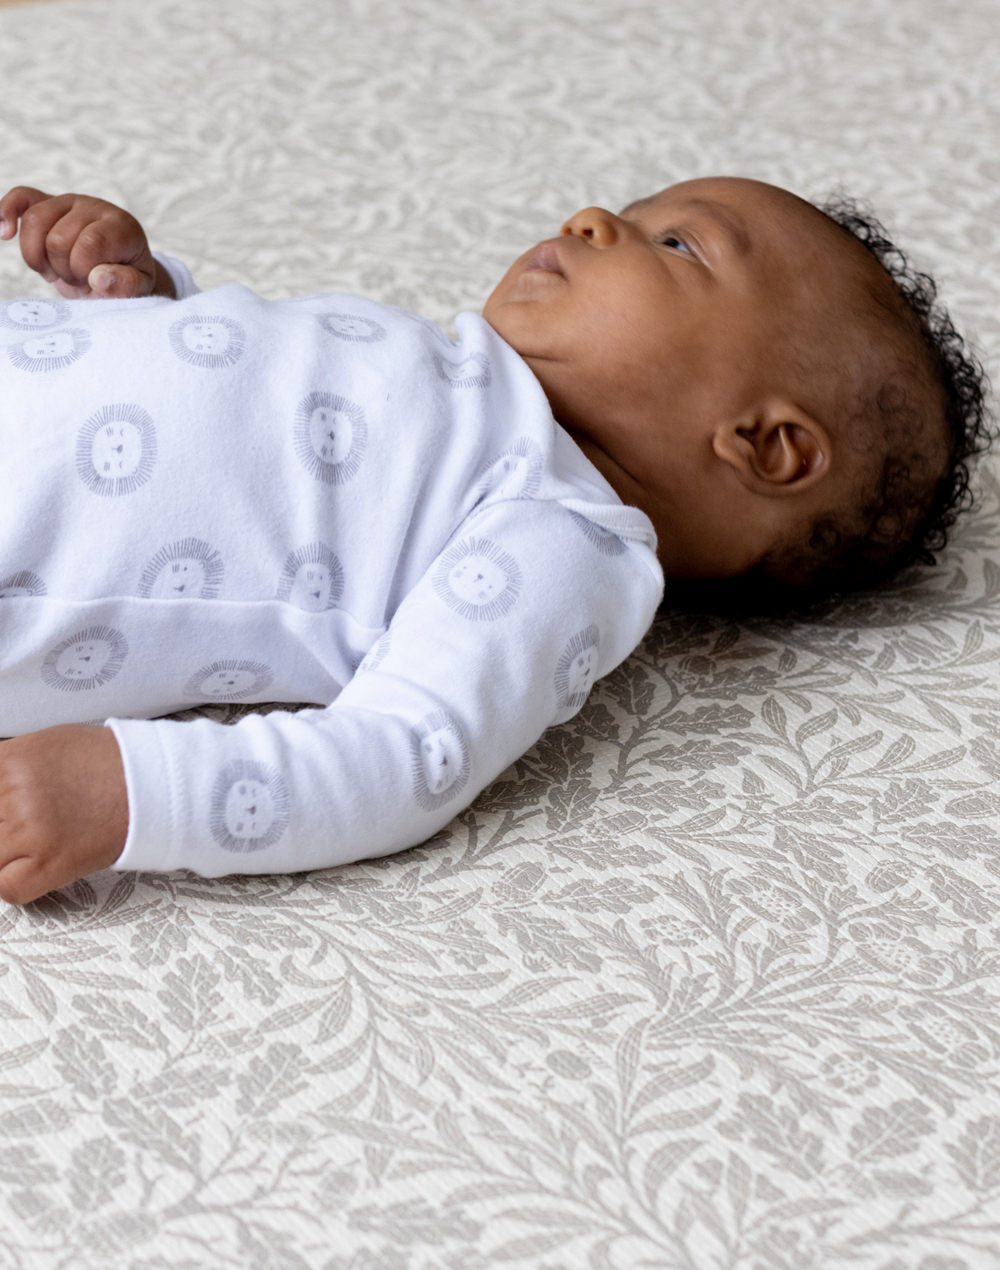 totter and tumble padded playmat in acorn morris & co print infant lying on playmat for floor